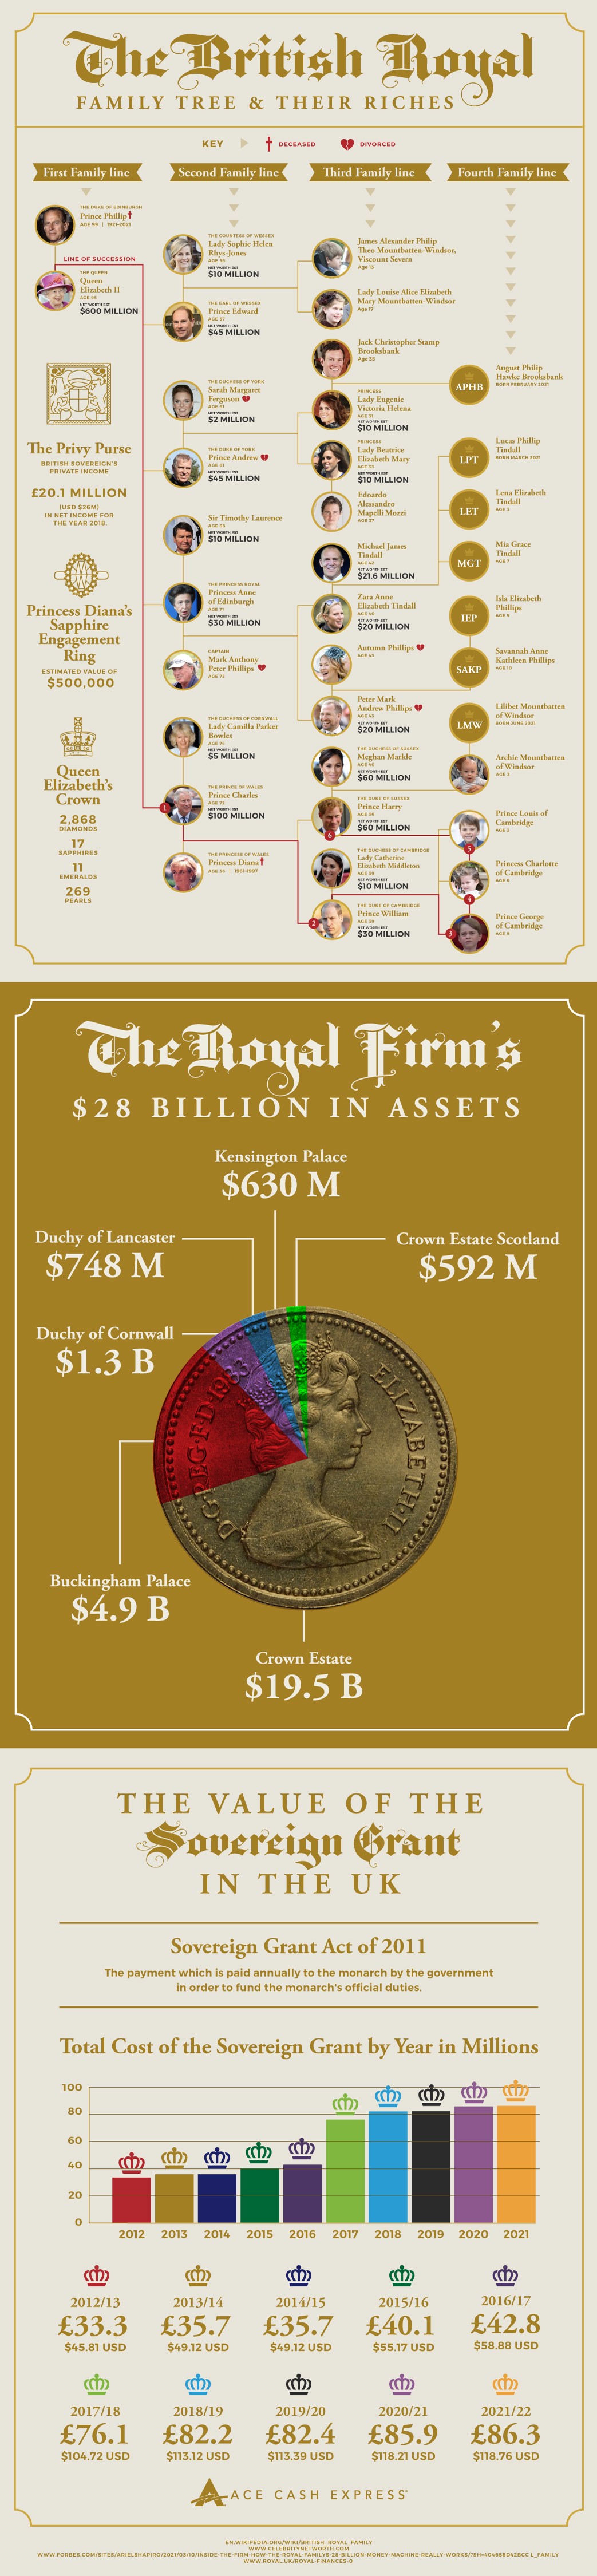 The British Royal Family Tree & Their Riches Infographic